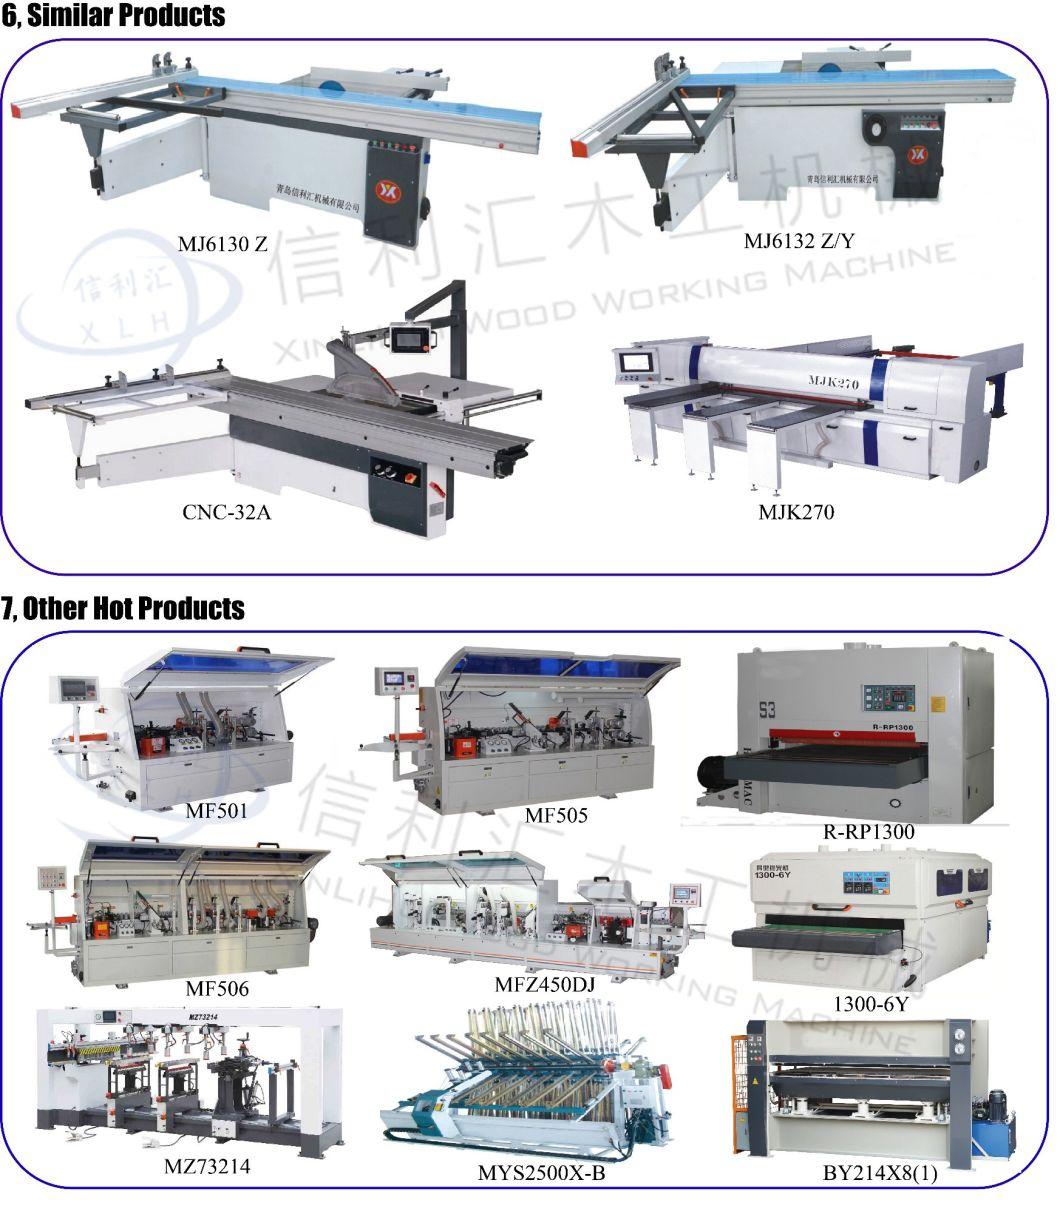 Low Cost 2800/ 3000/ 3200/ 3800 mm Sliding Table Panel Saw Wood Working Machine for Laminate Board/ Wood Sheet/ Plywood Plate